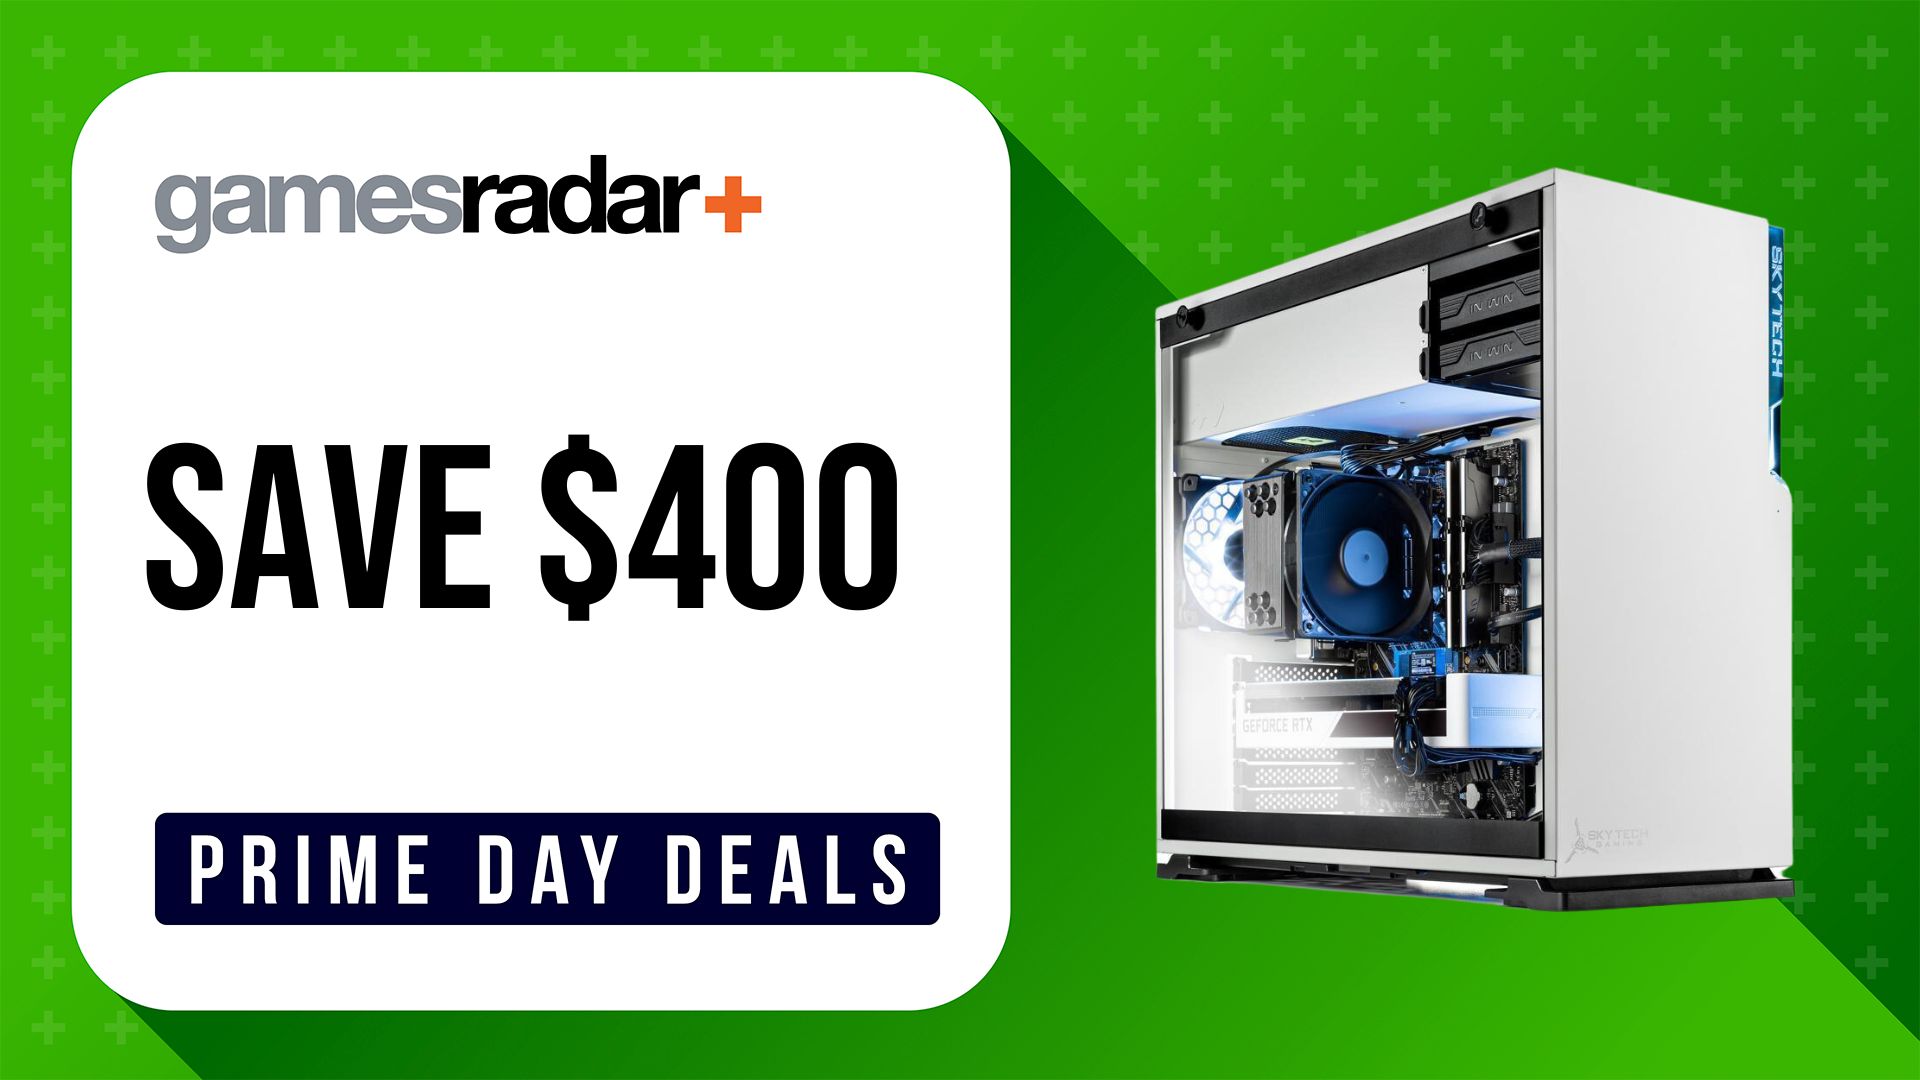 Skytech Shiva Prime Day Gaming PC deal with green background and $400 saving stamp